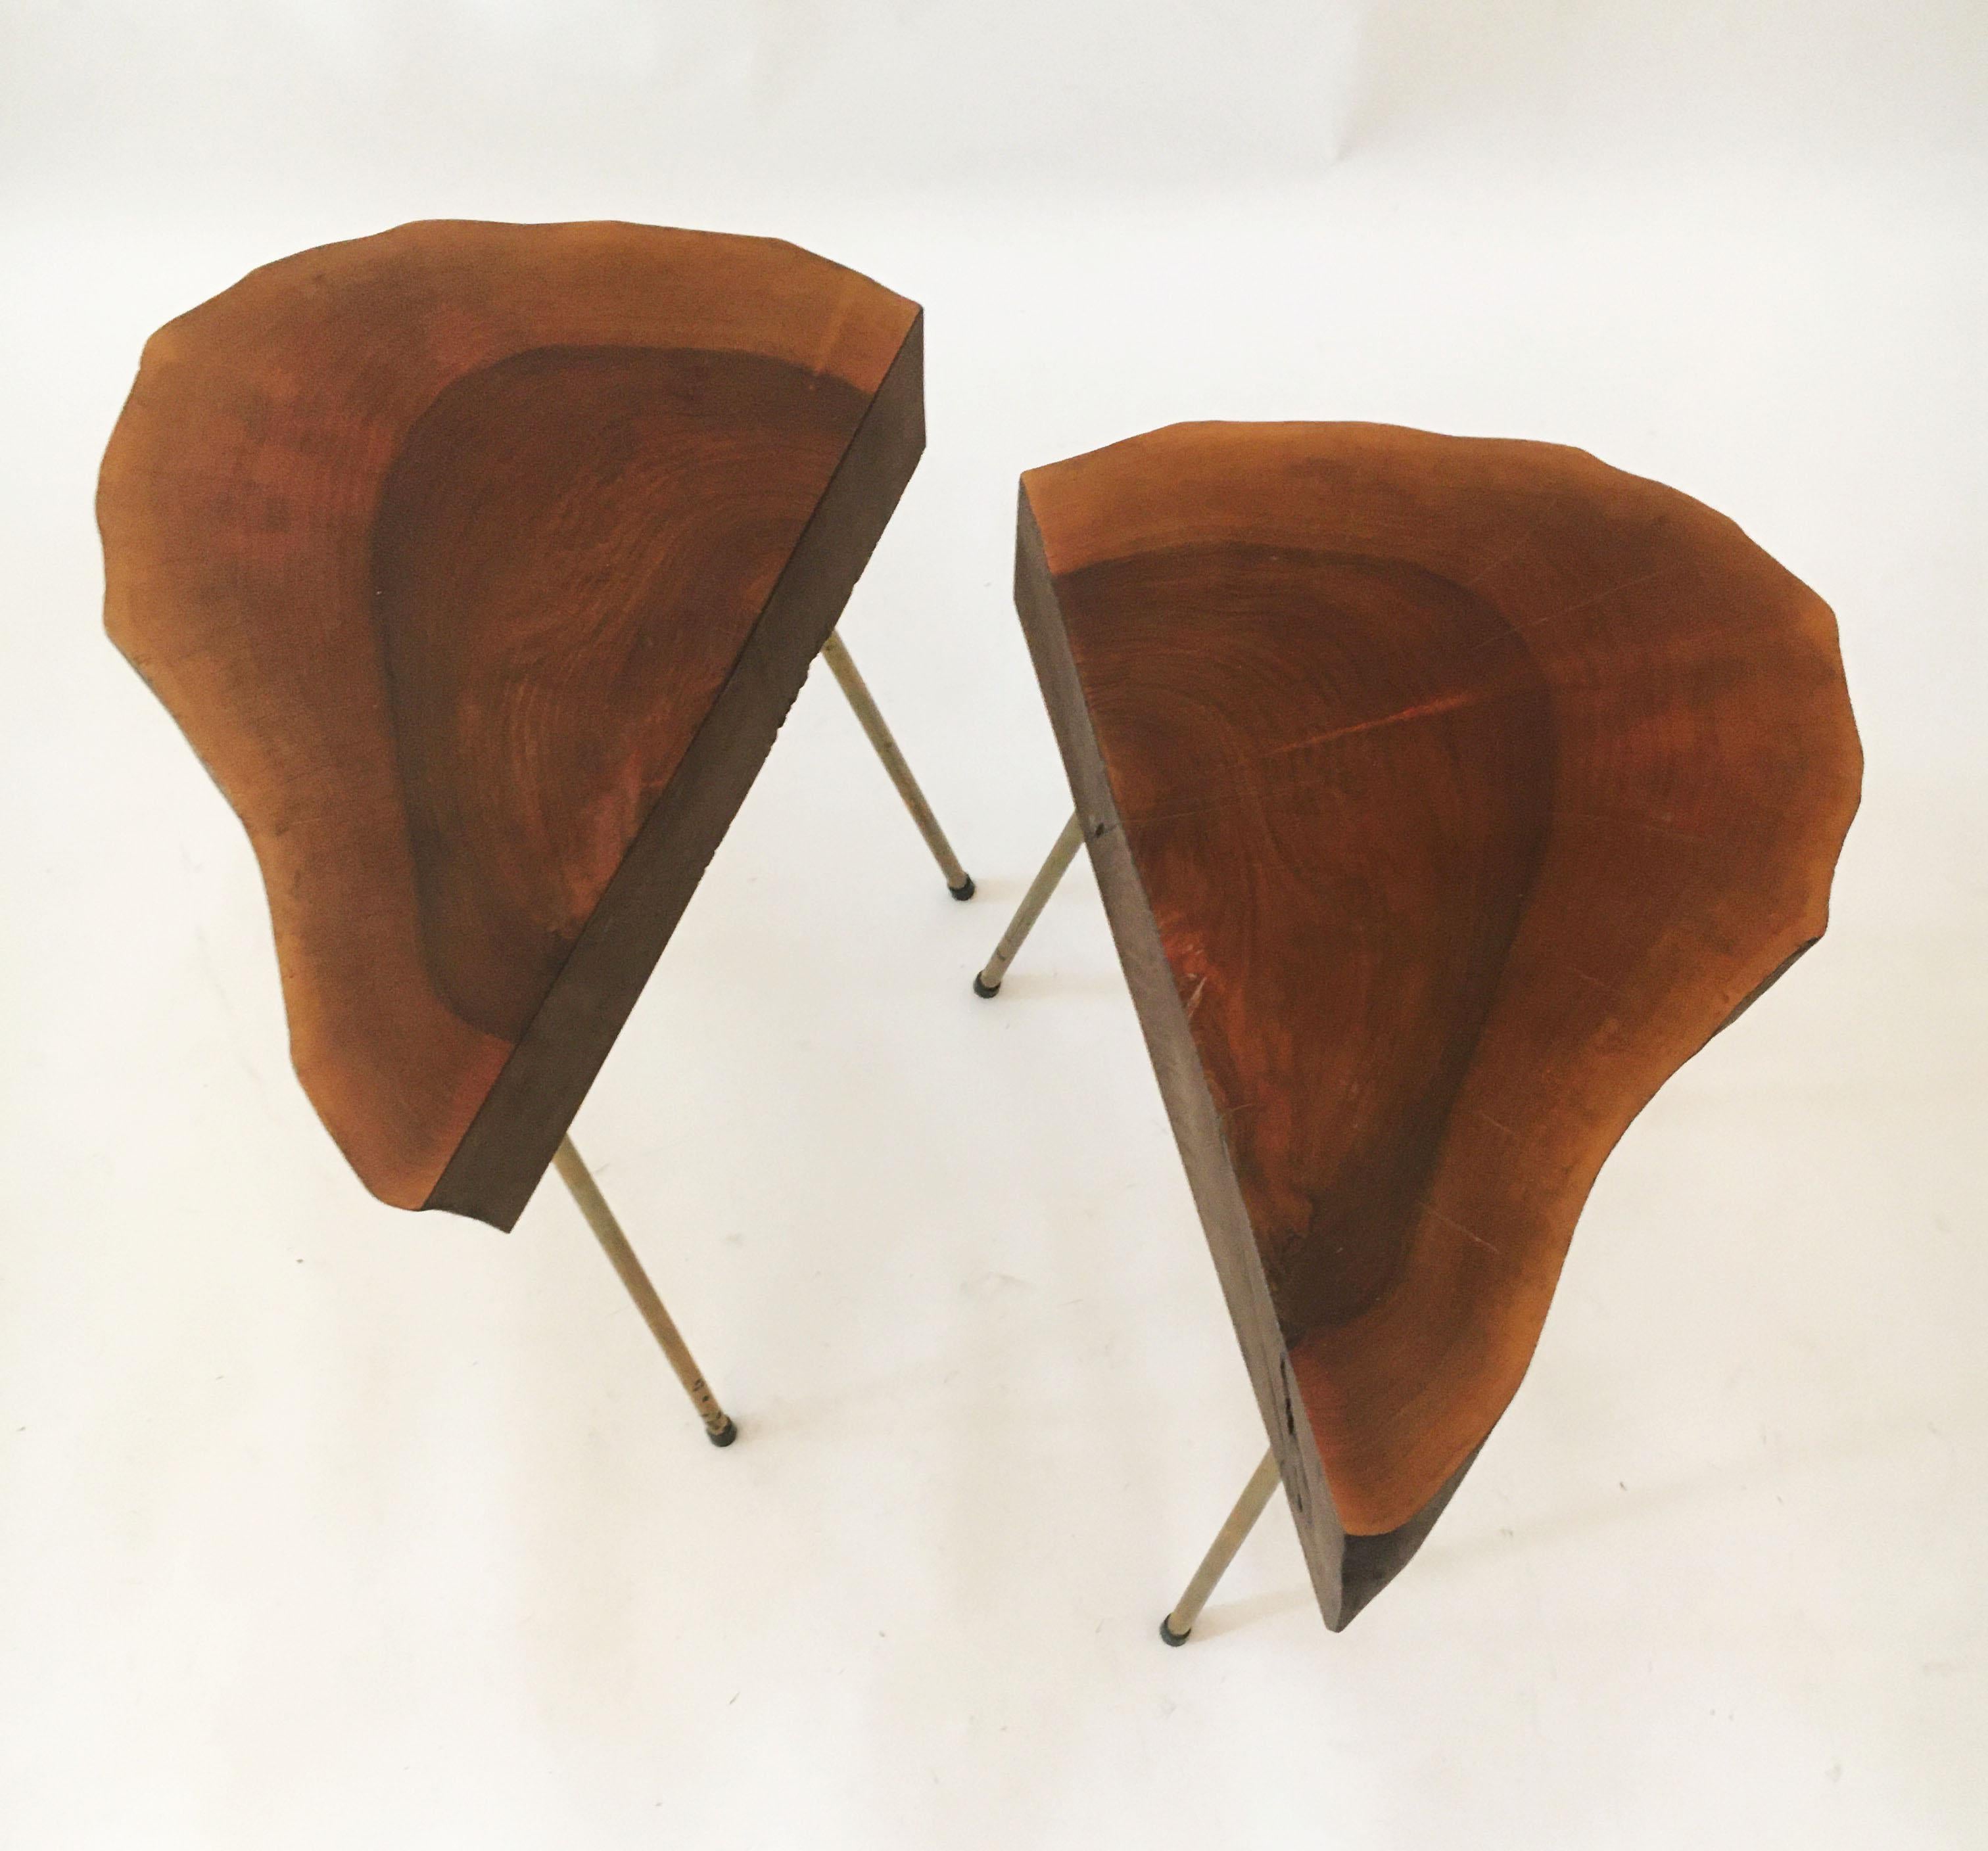 Brass Live Edge Tree Trunk 'Heart' Table Pair, Austria 1950s For Sale